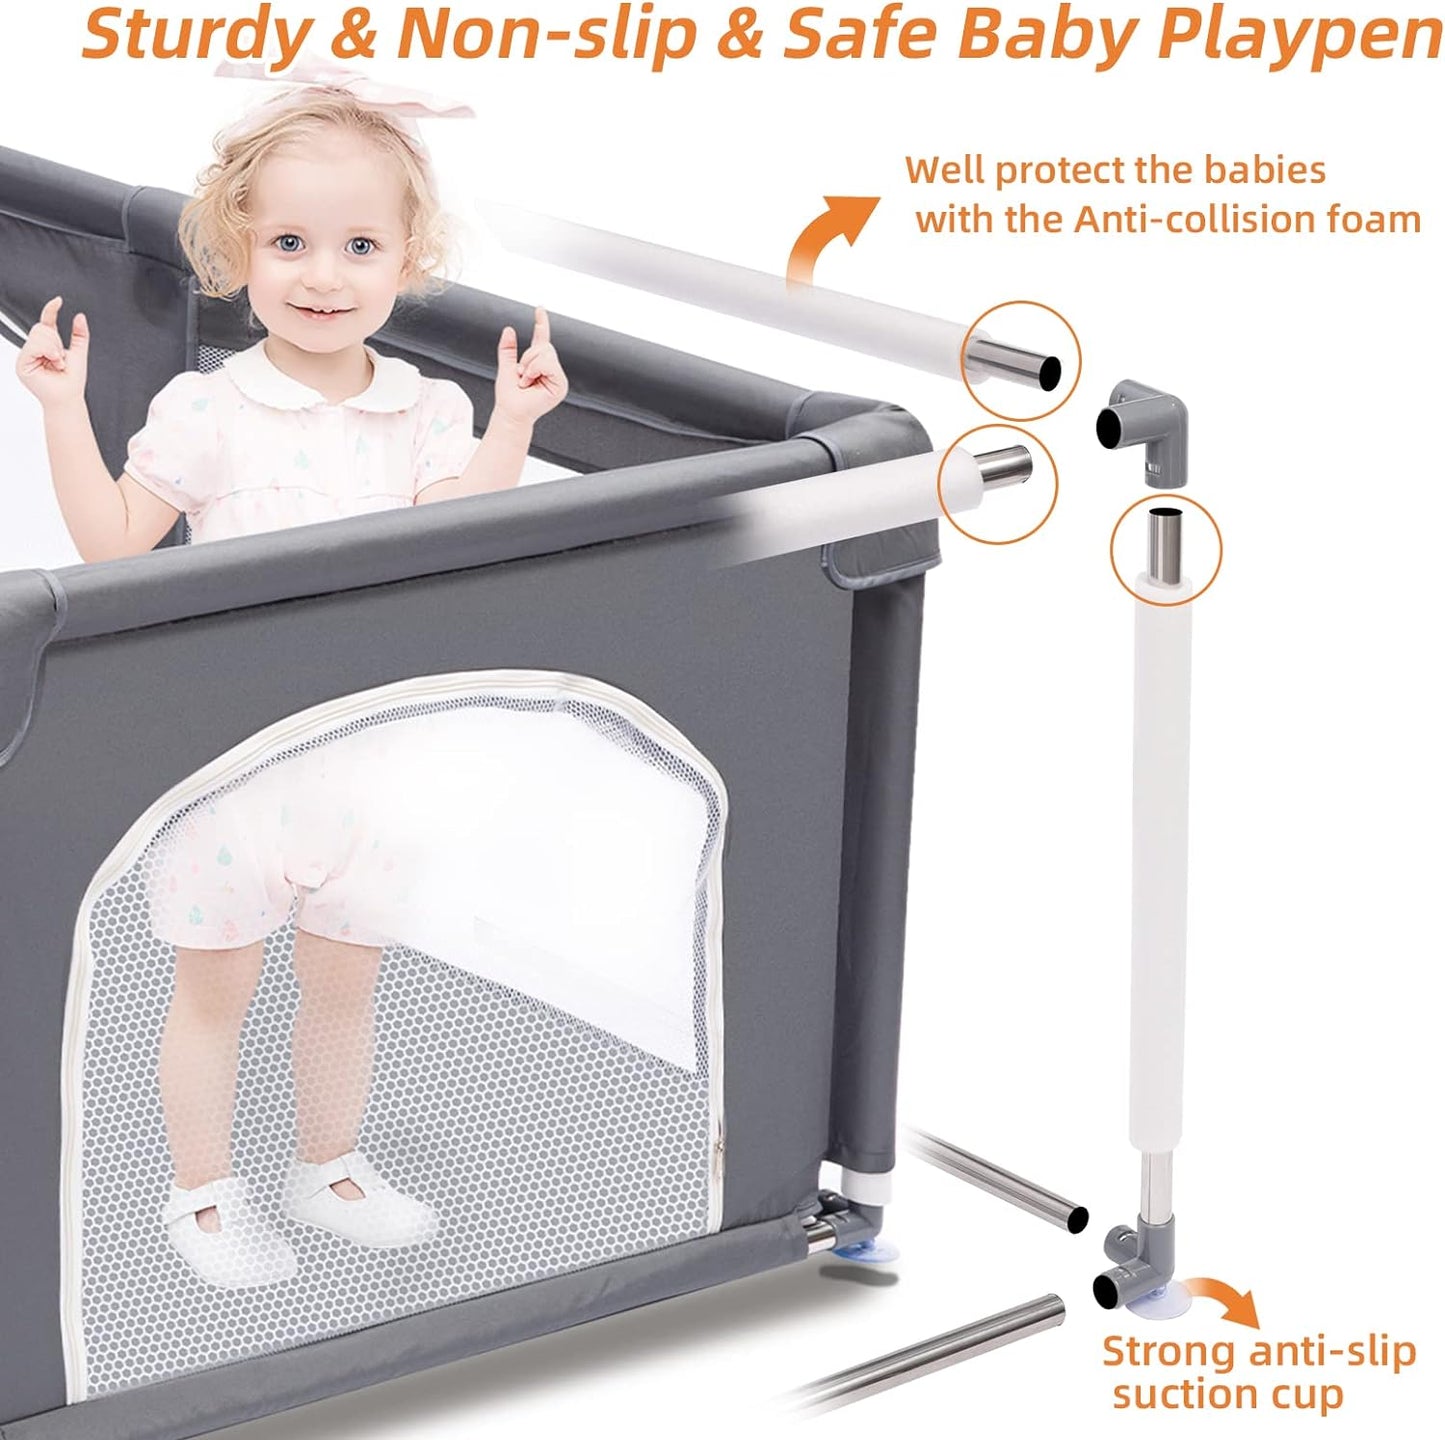 Baby Playpen, Playpen for Babies and Toddlers, Kids Safety Playard with Anti-Collision Foam 1.2 BY 1.2